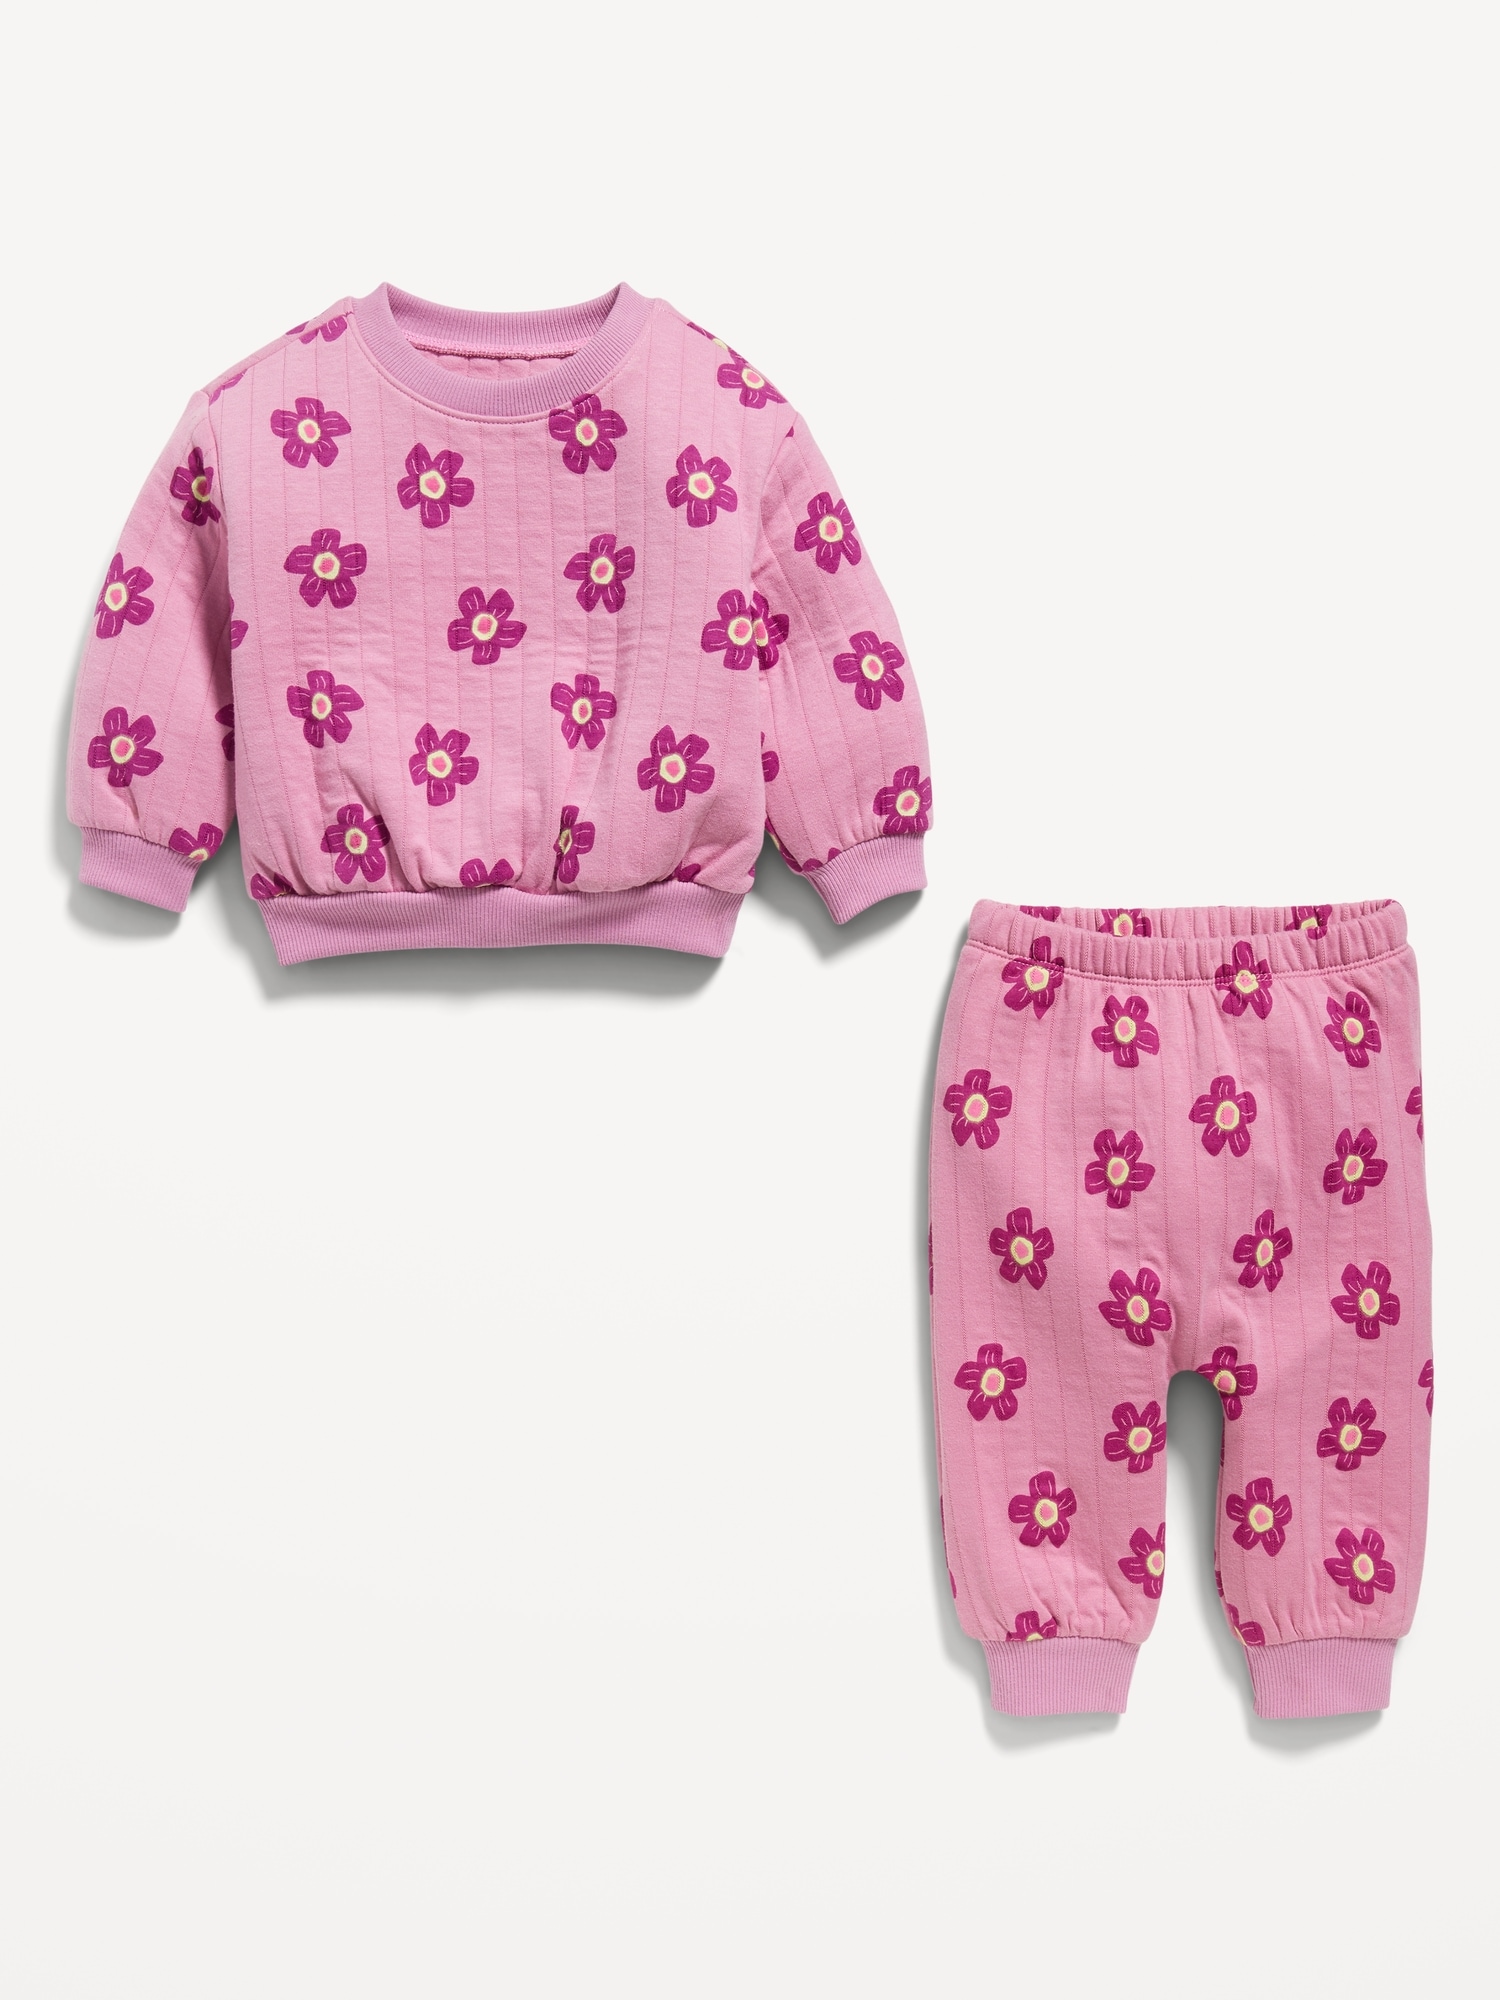 Unisex Printed Quilted Crew-Neck Sweatshirt & Jogger Pants Set for